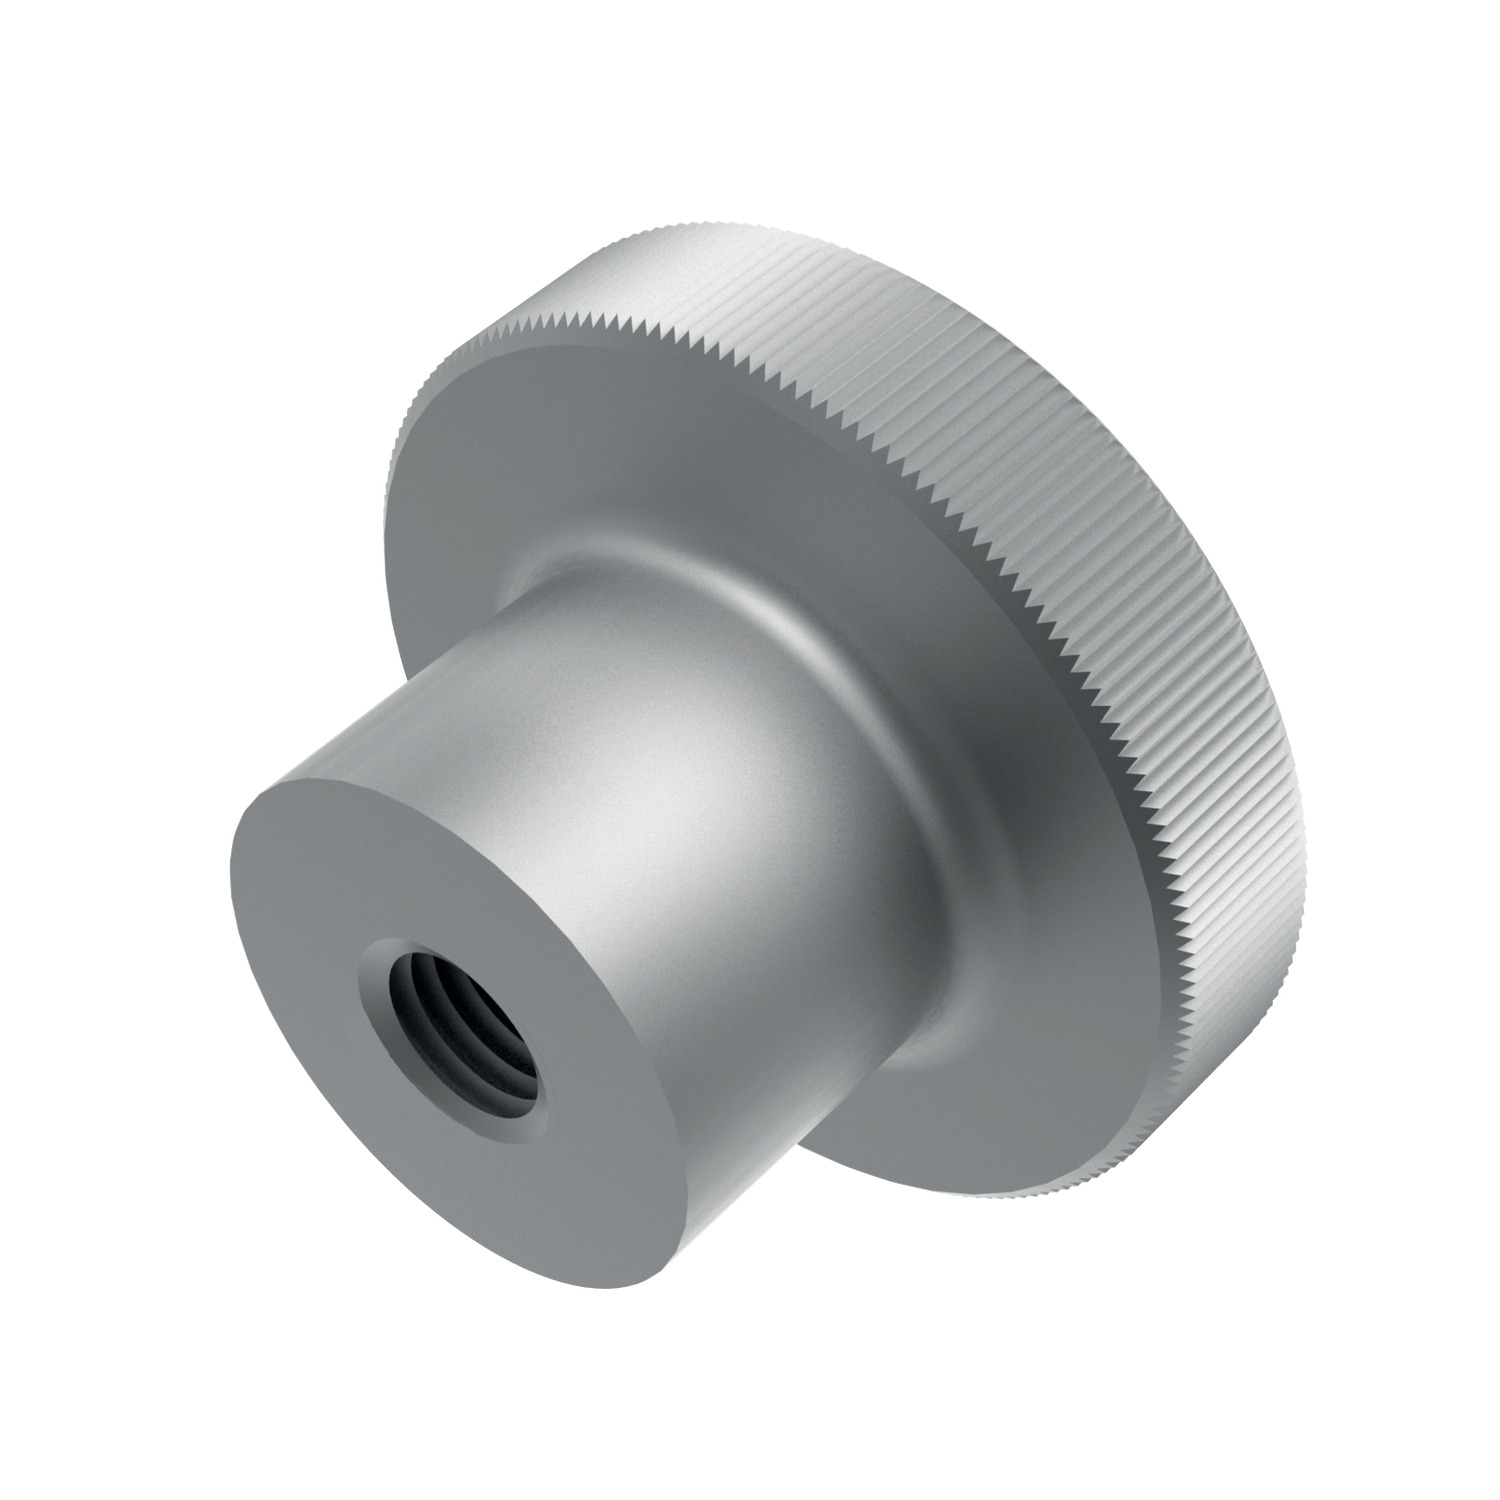 P0403.020-A4 Knurled Nuts with Collar M2 A4 s/s 